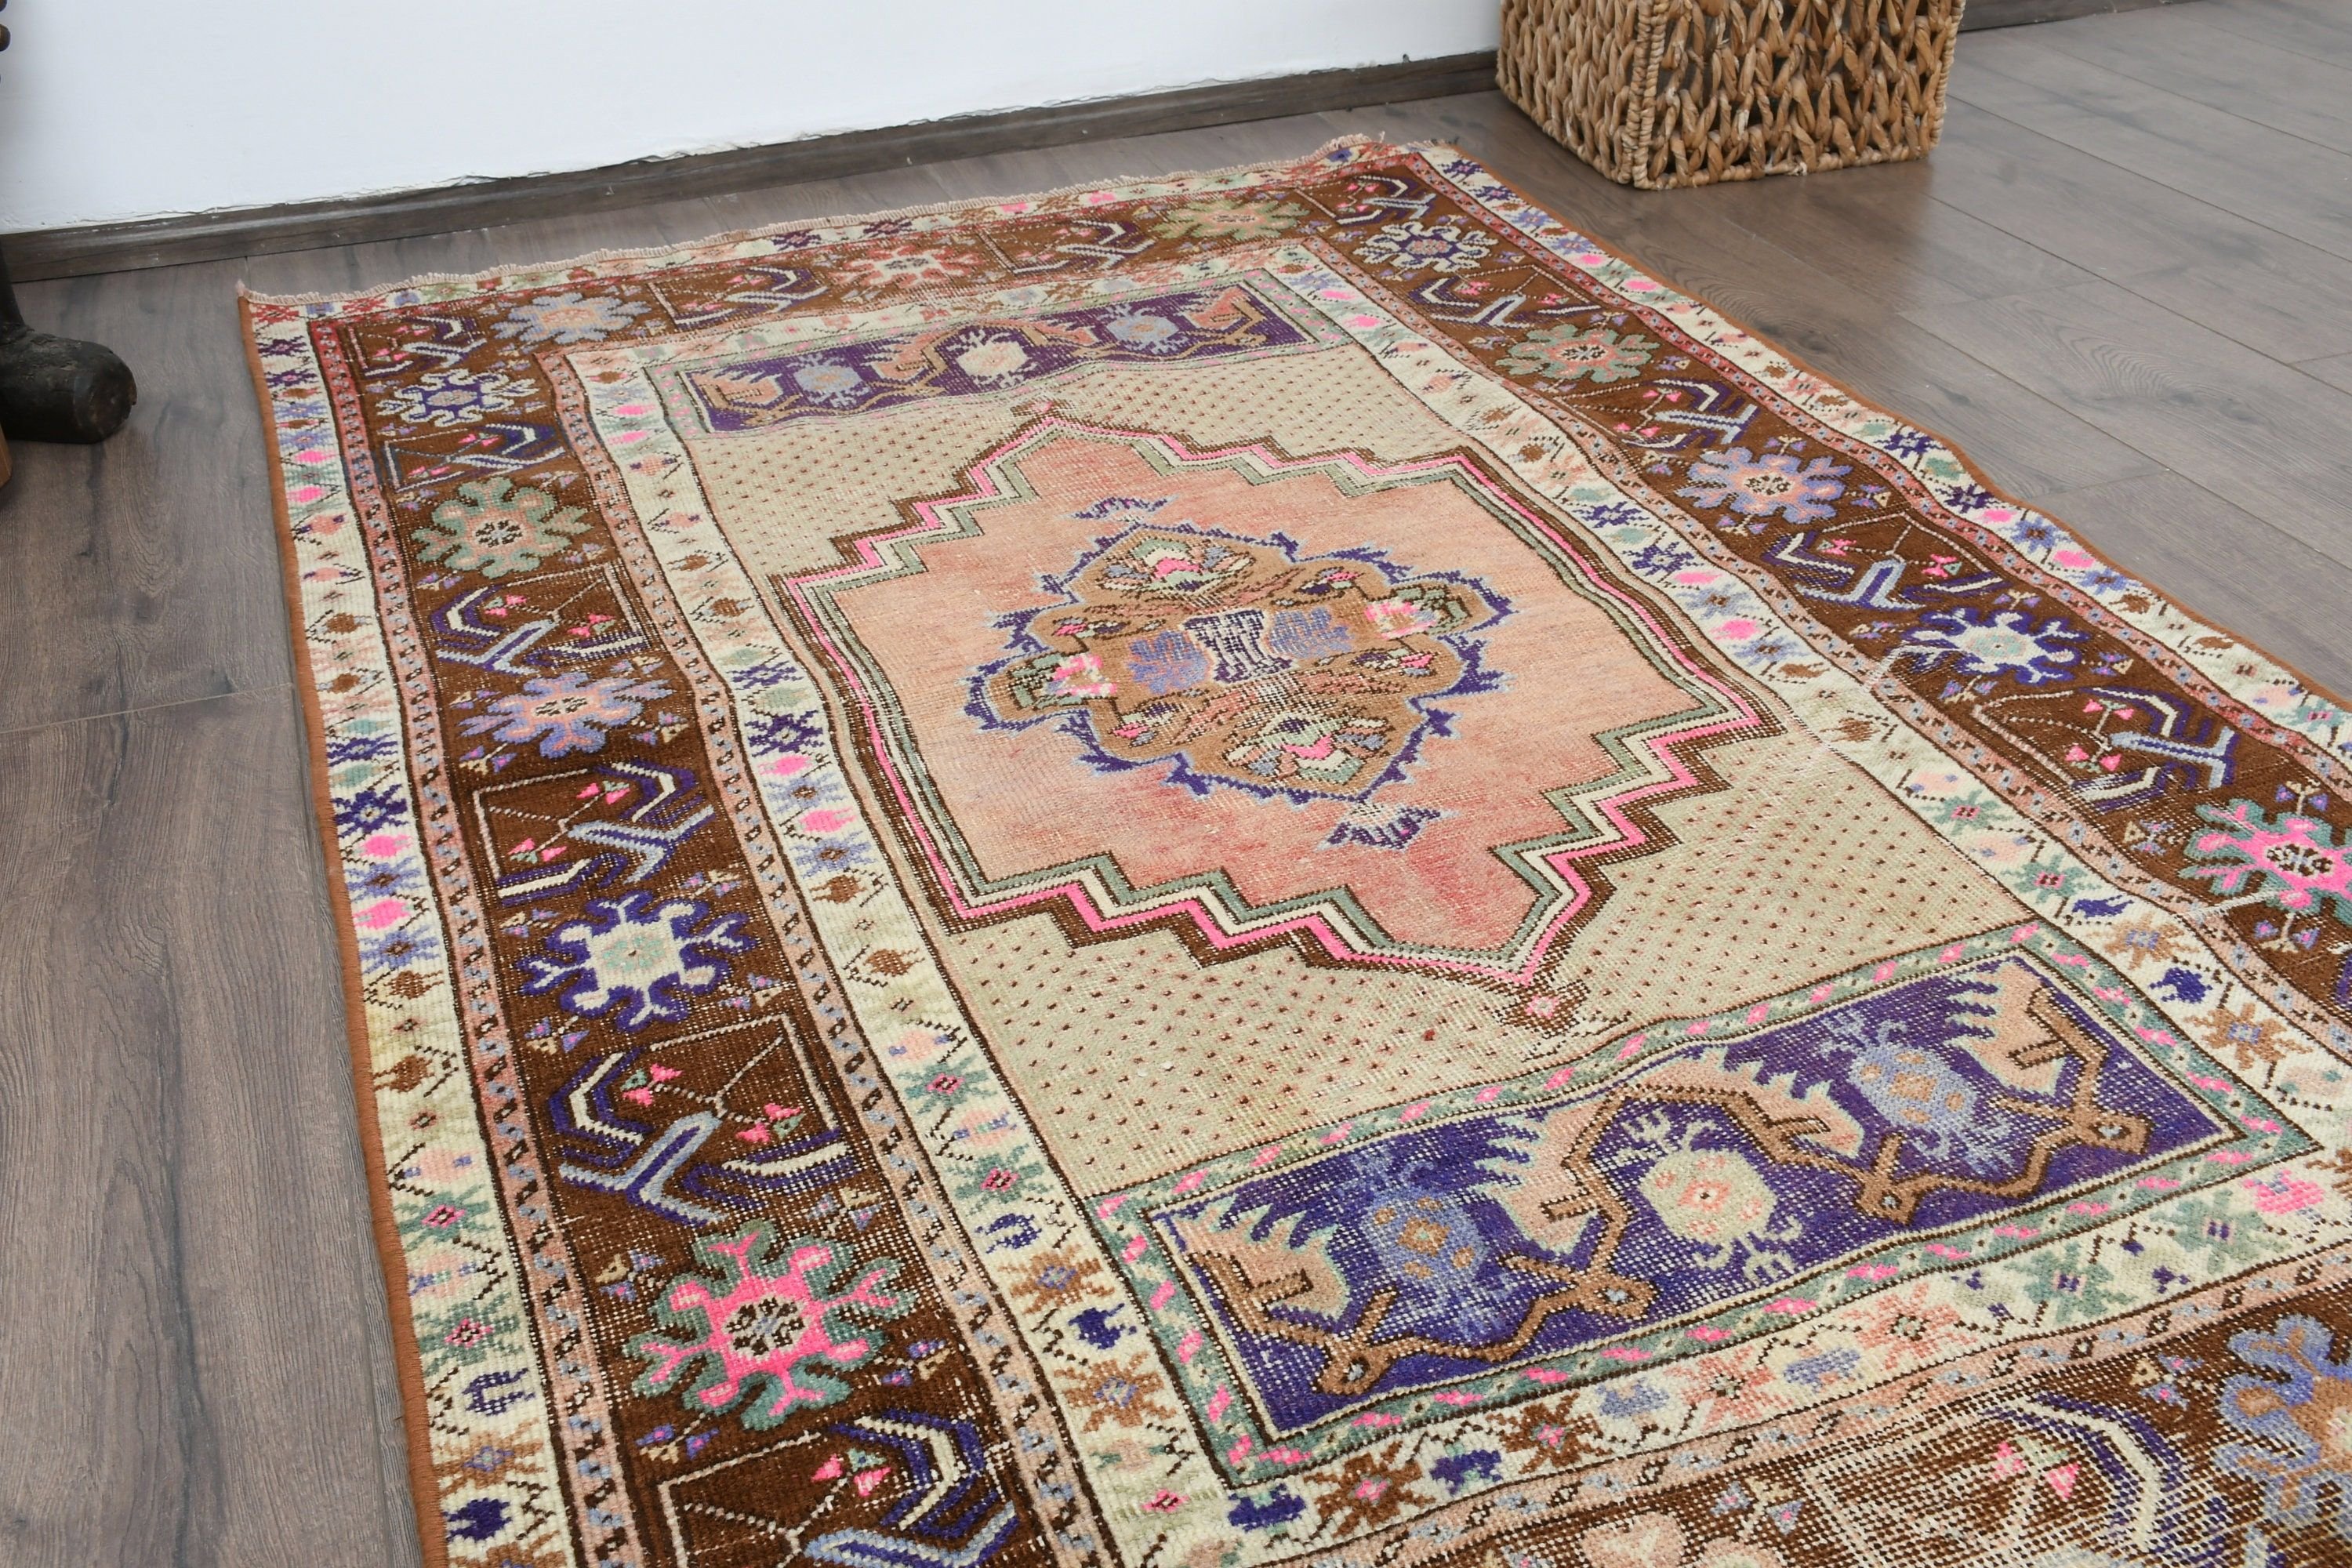 Eclectic Rug, 3.3x5.2 ft Accent Rug, Turkish Rug, Vintage Rug, Brown Anatolian Rugs, Bedroom Rug, Moroccan Rugs, Entry Rug, Antique Rug